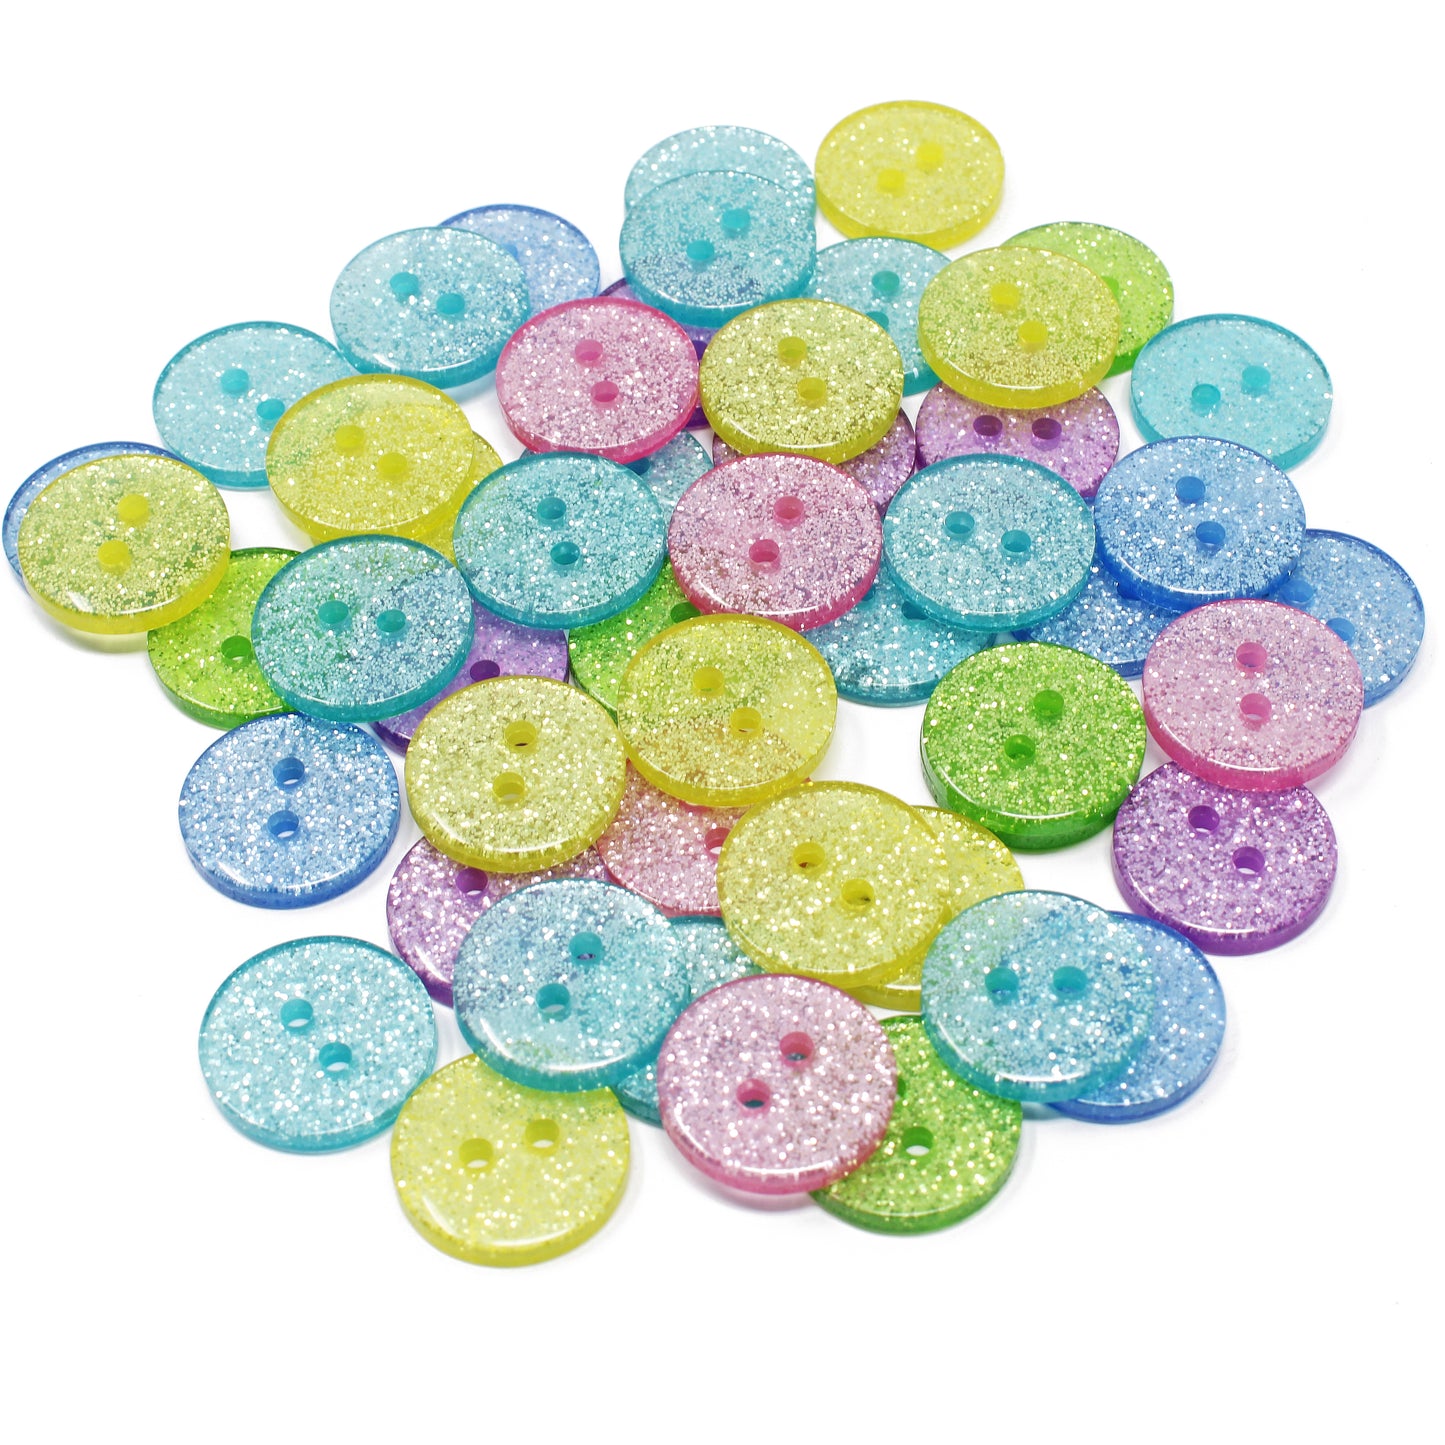 Pastel Mix 50 Mix Glitter Round 15mm Resin Buttons